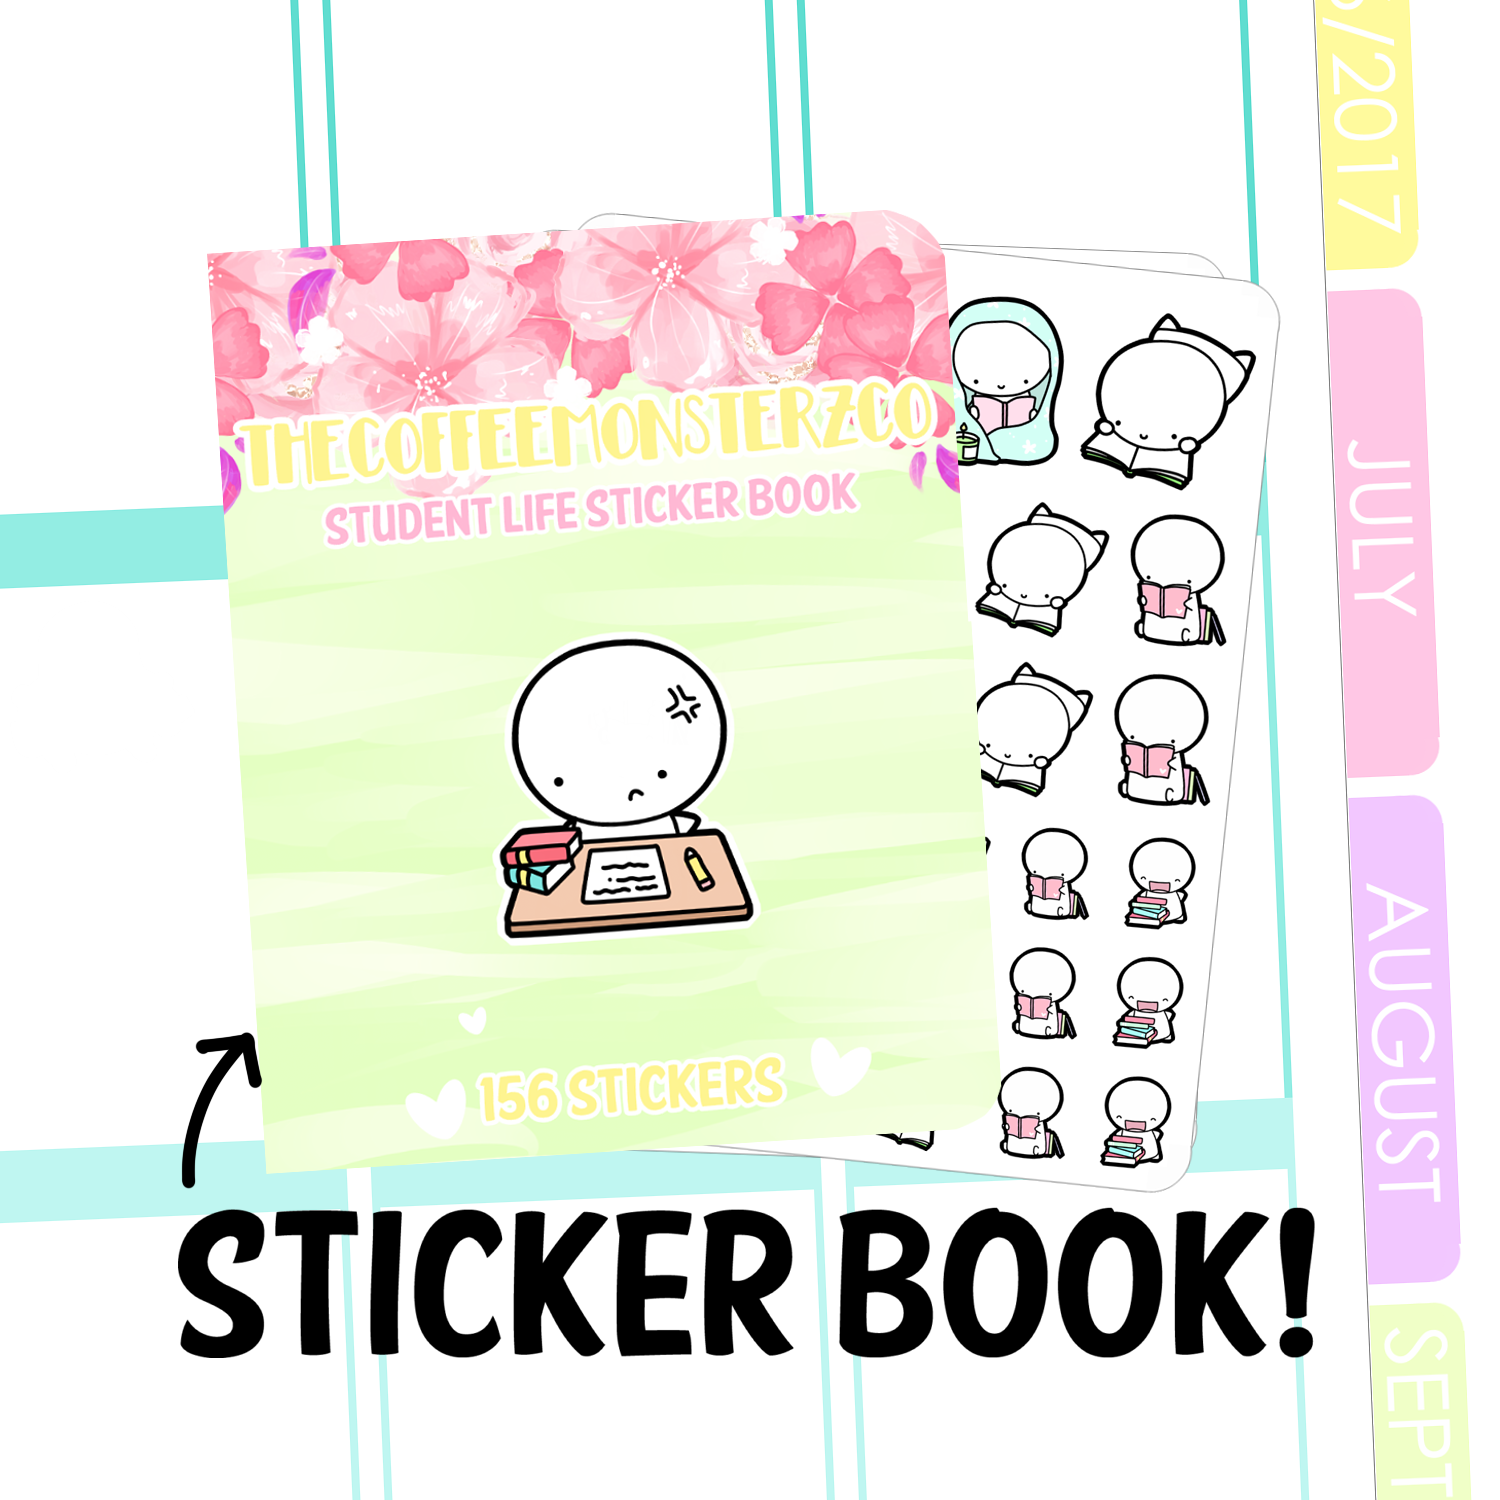 student life Sticker Book, TheCoffeeMonsterzCo